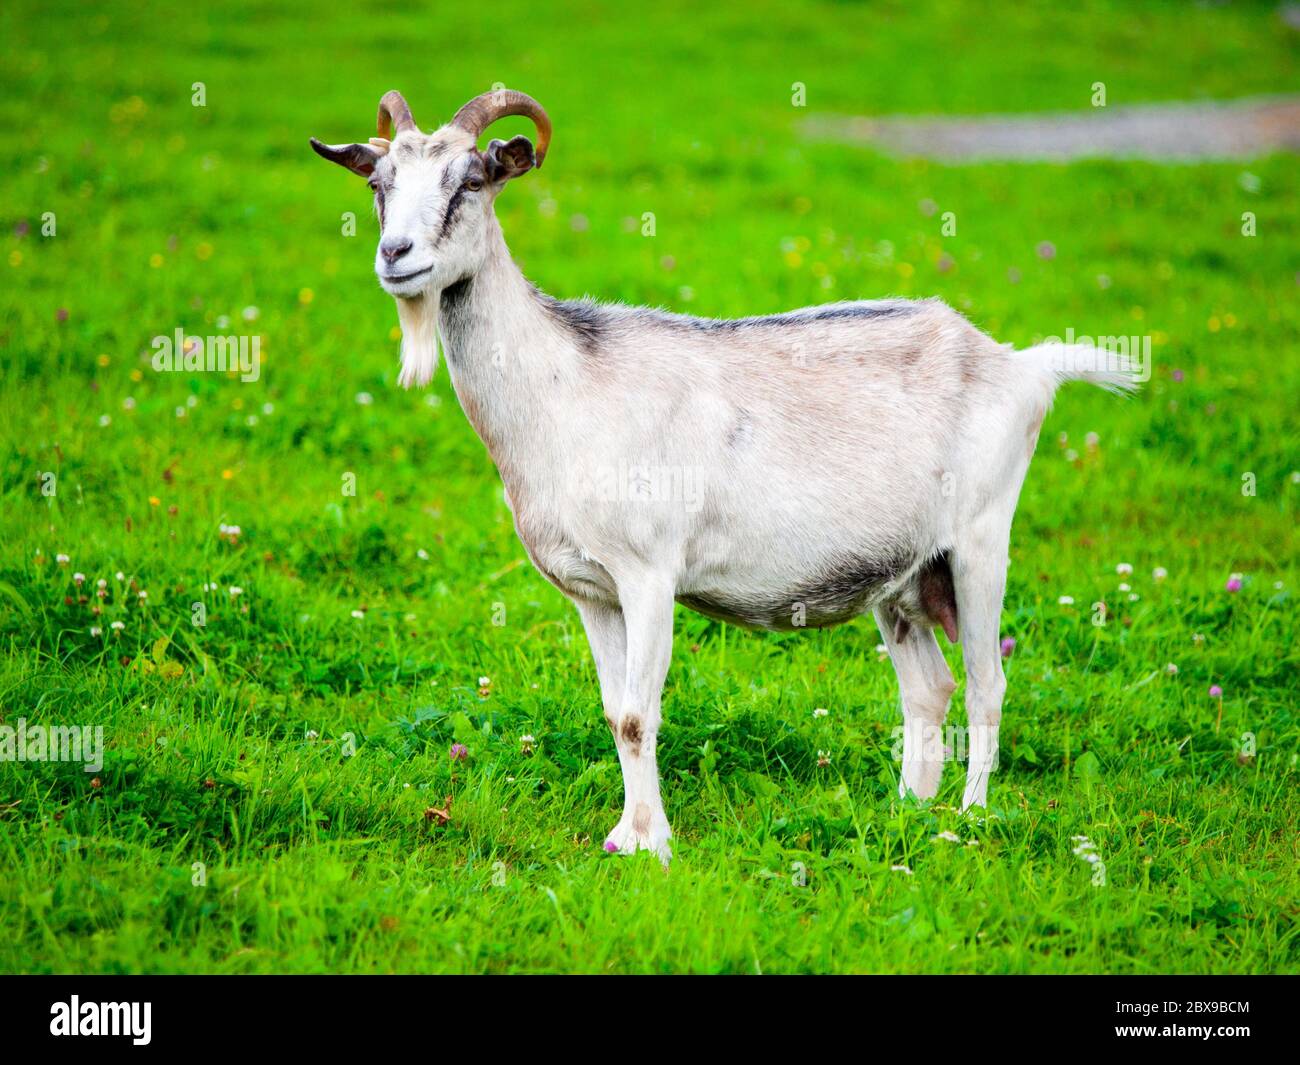 White goat standing in the green grass. Stock Photo